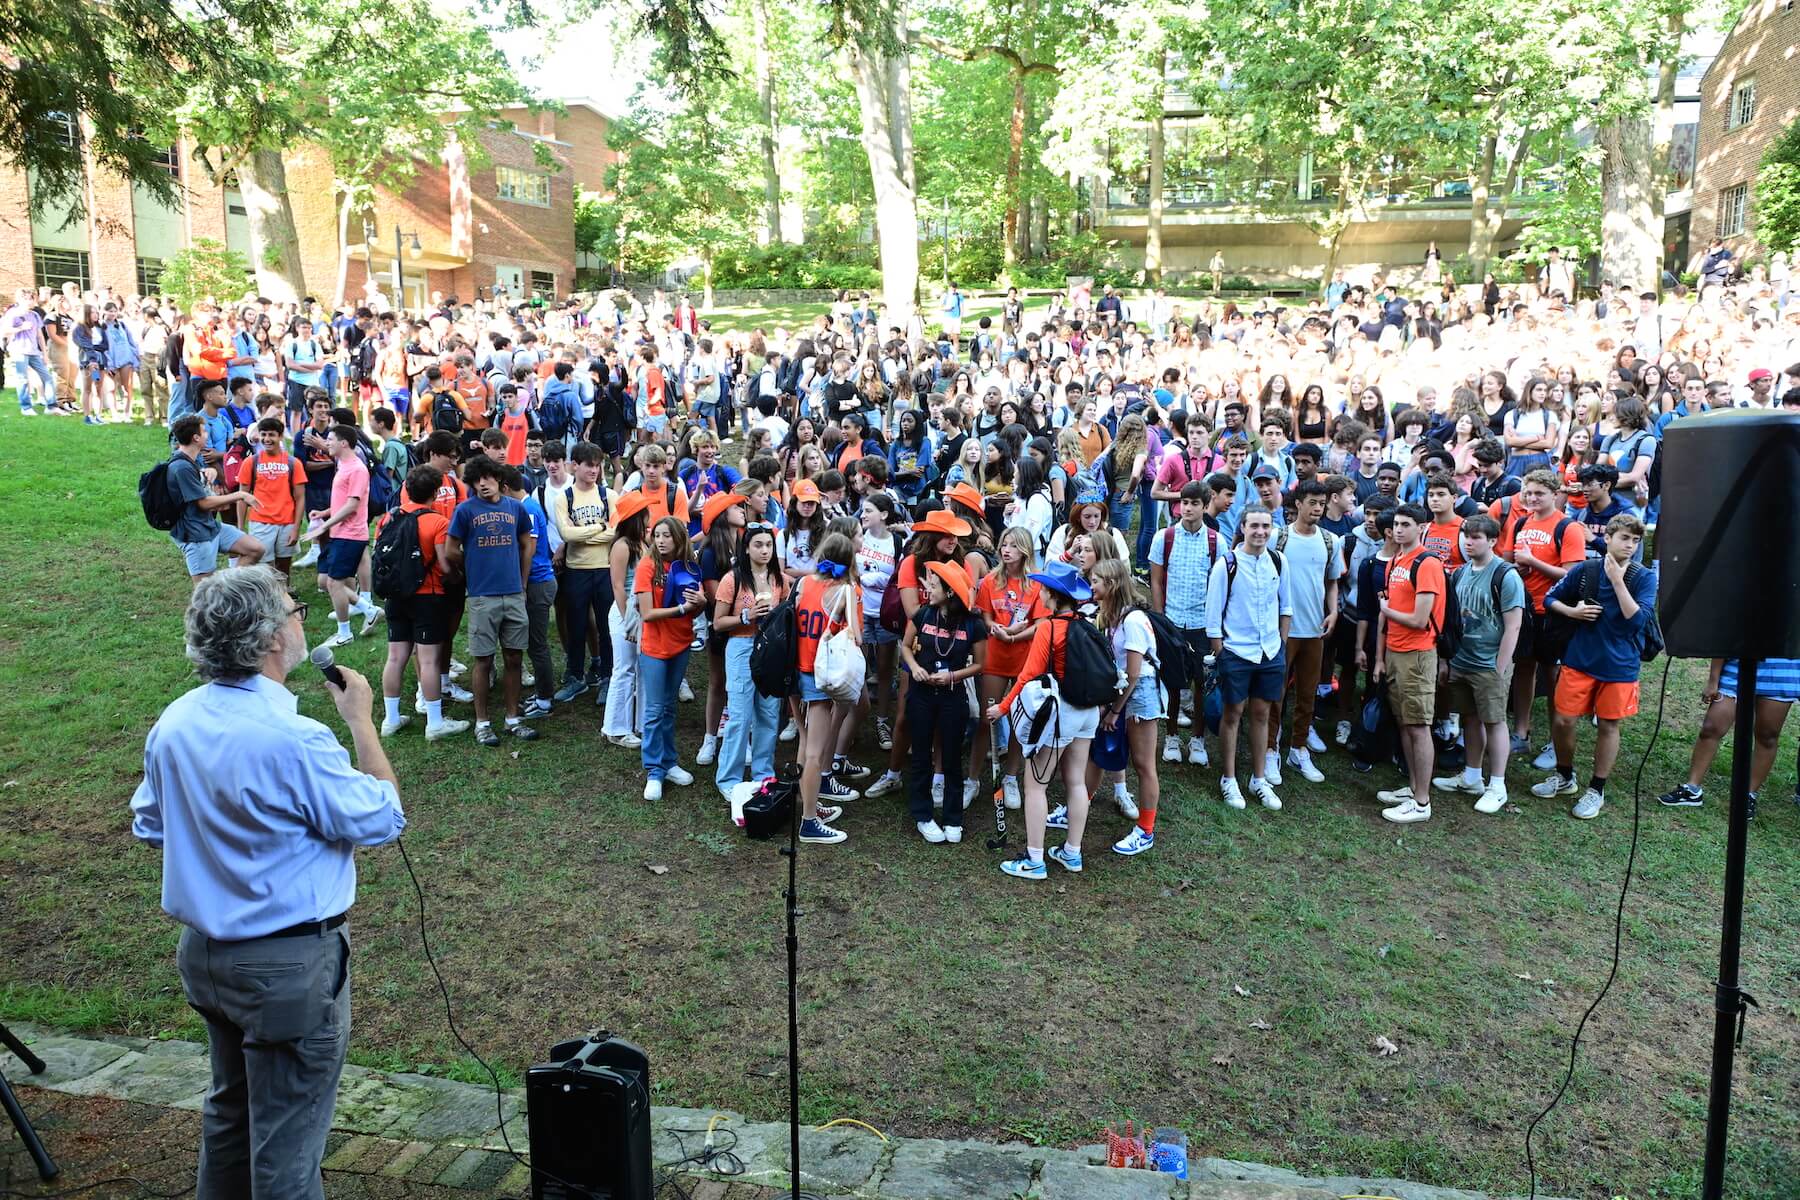 Ethical Culture Fieldston School Joe Algrant speaking to large group of upper school students on the quad